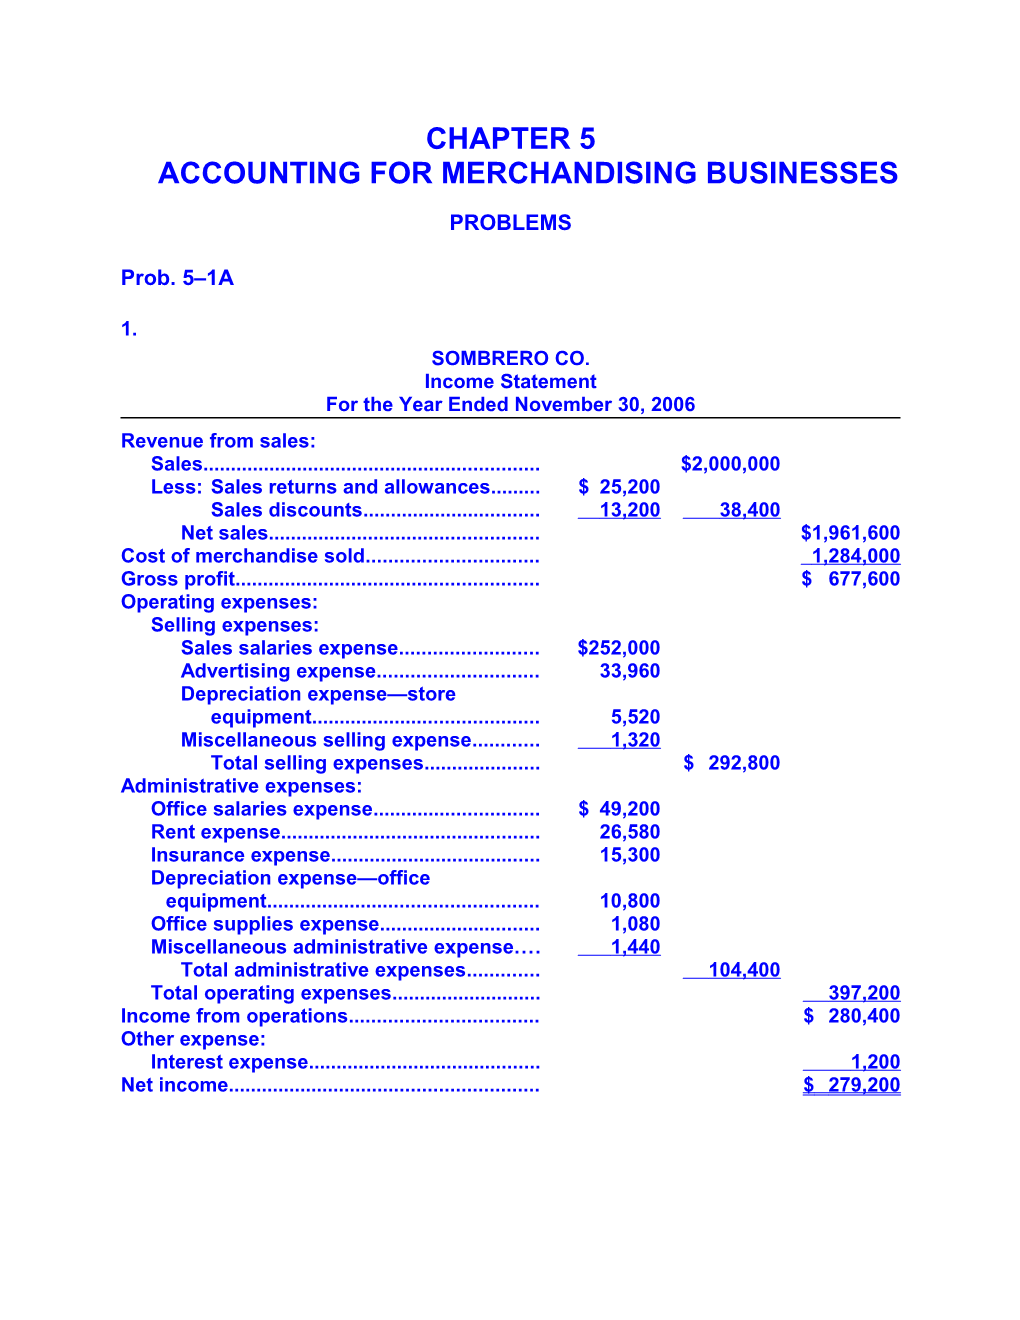 Chapter 5Accounting for Merchandising BUSINESSES